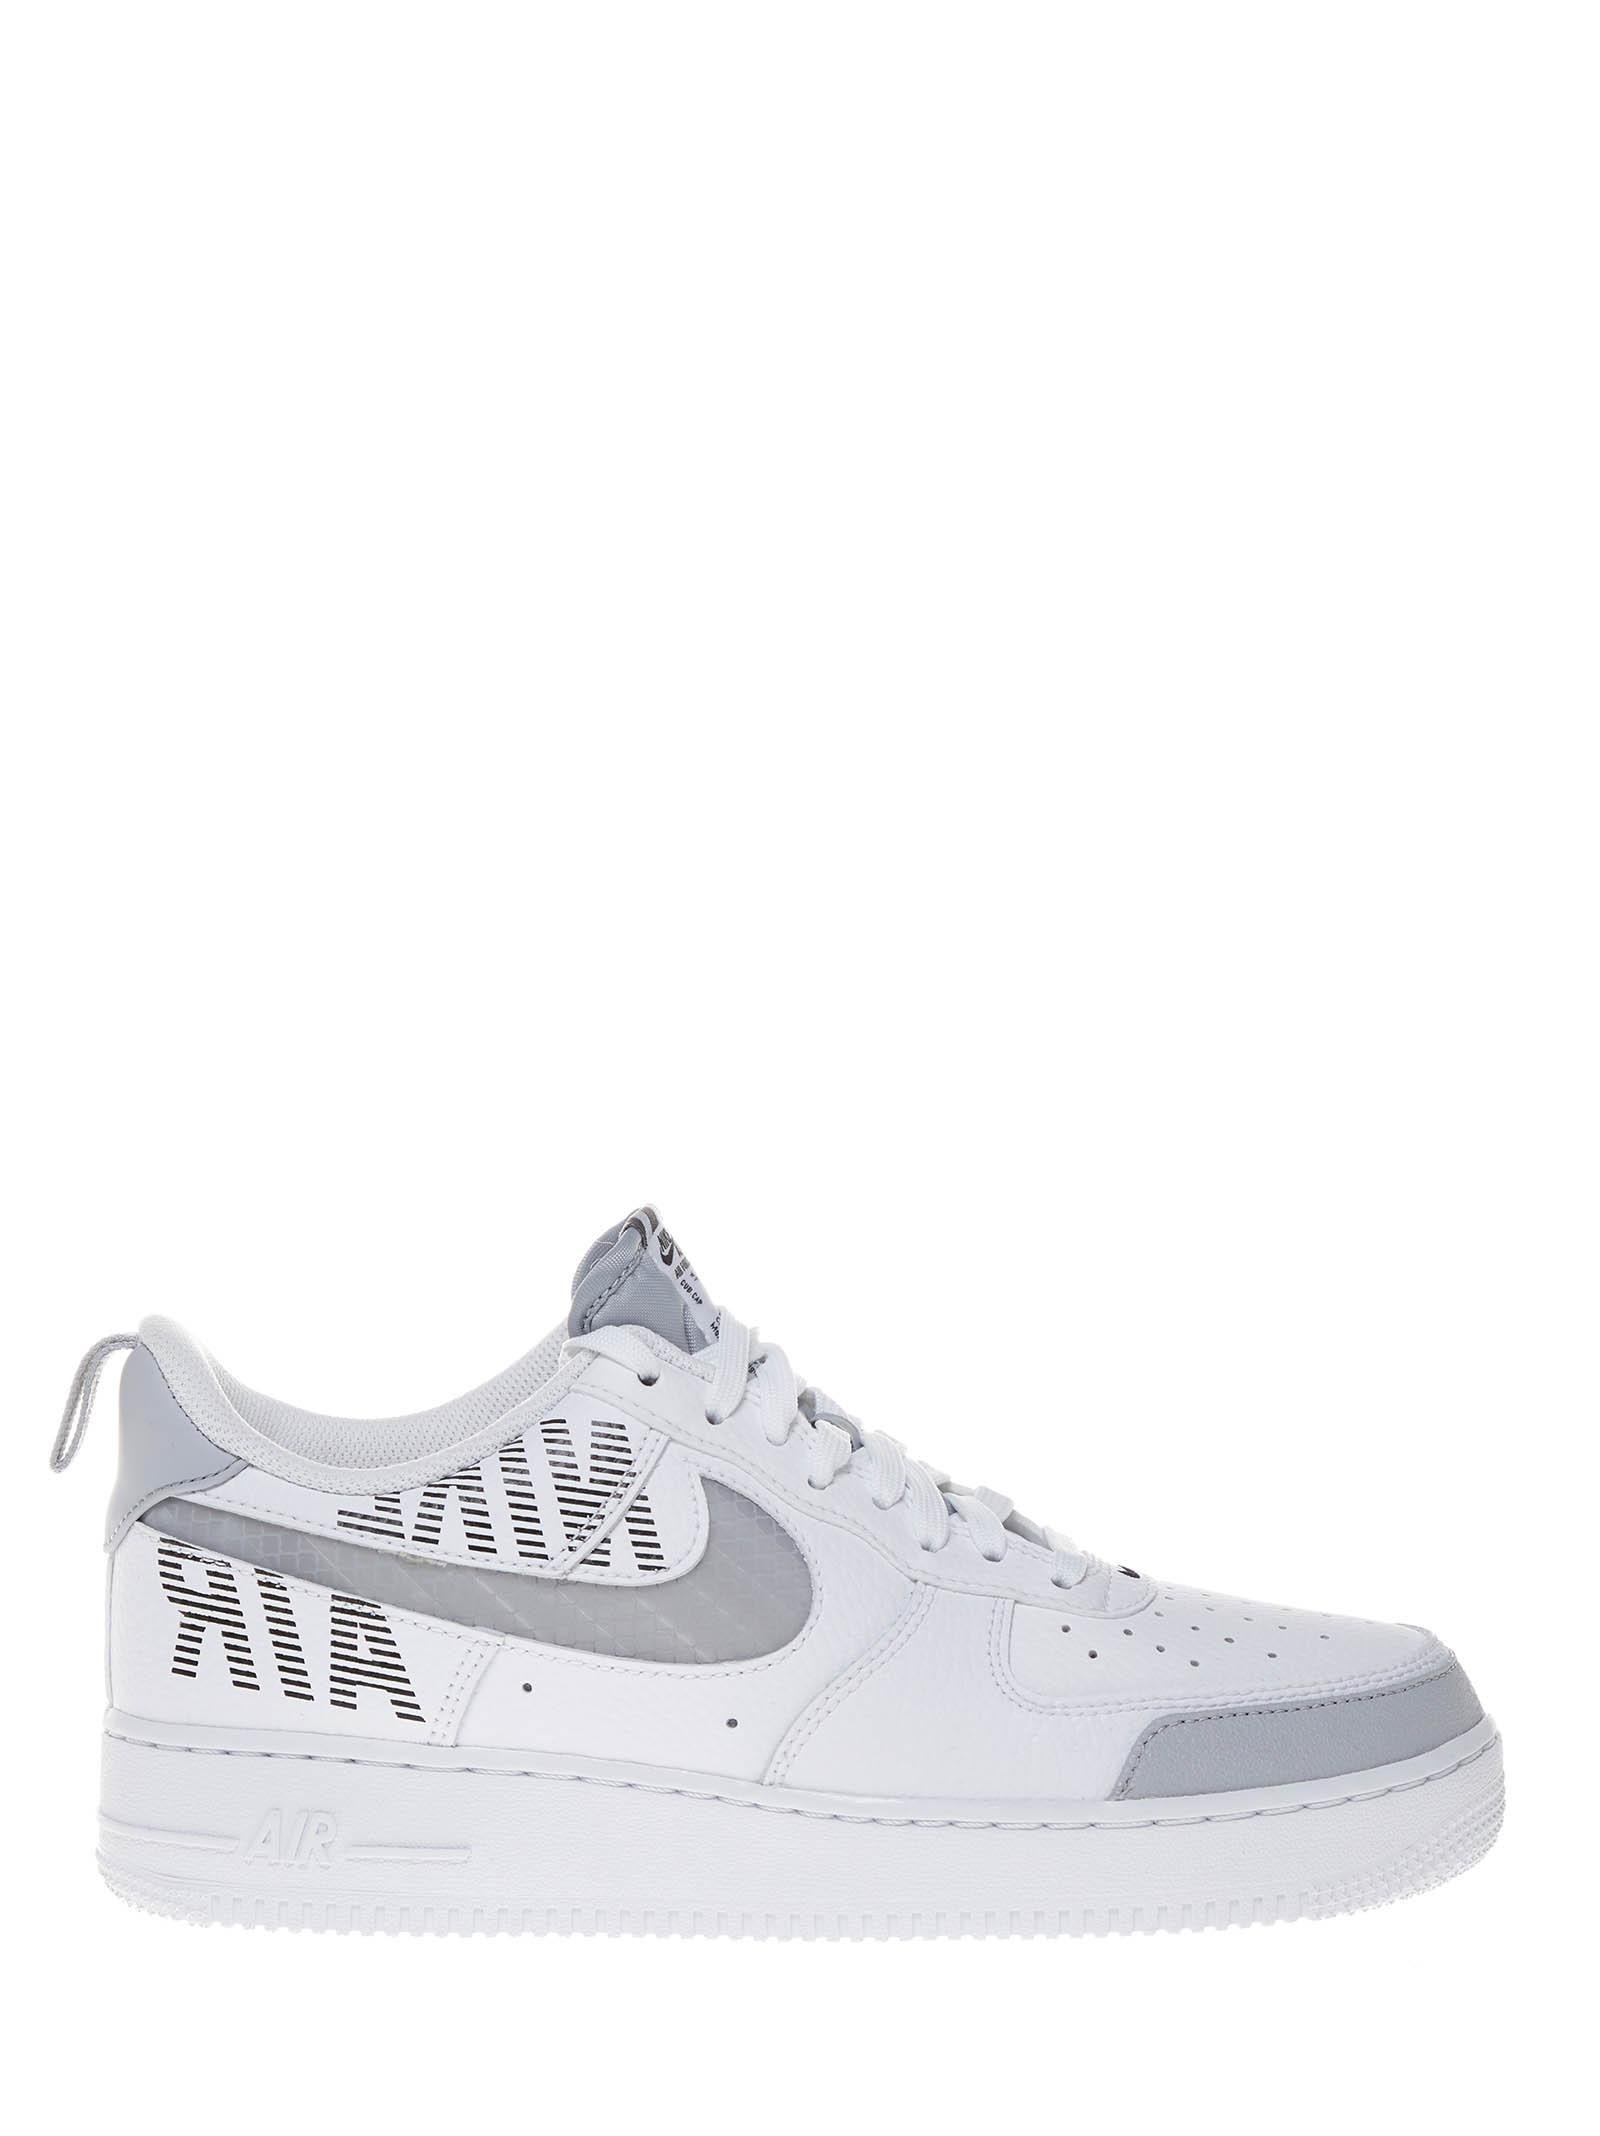 Nike White Air Force 1 '07 Lv8 Sneakers With Reflective Swoosh And Grey  Details. for Men | Lyst